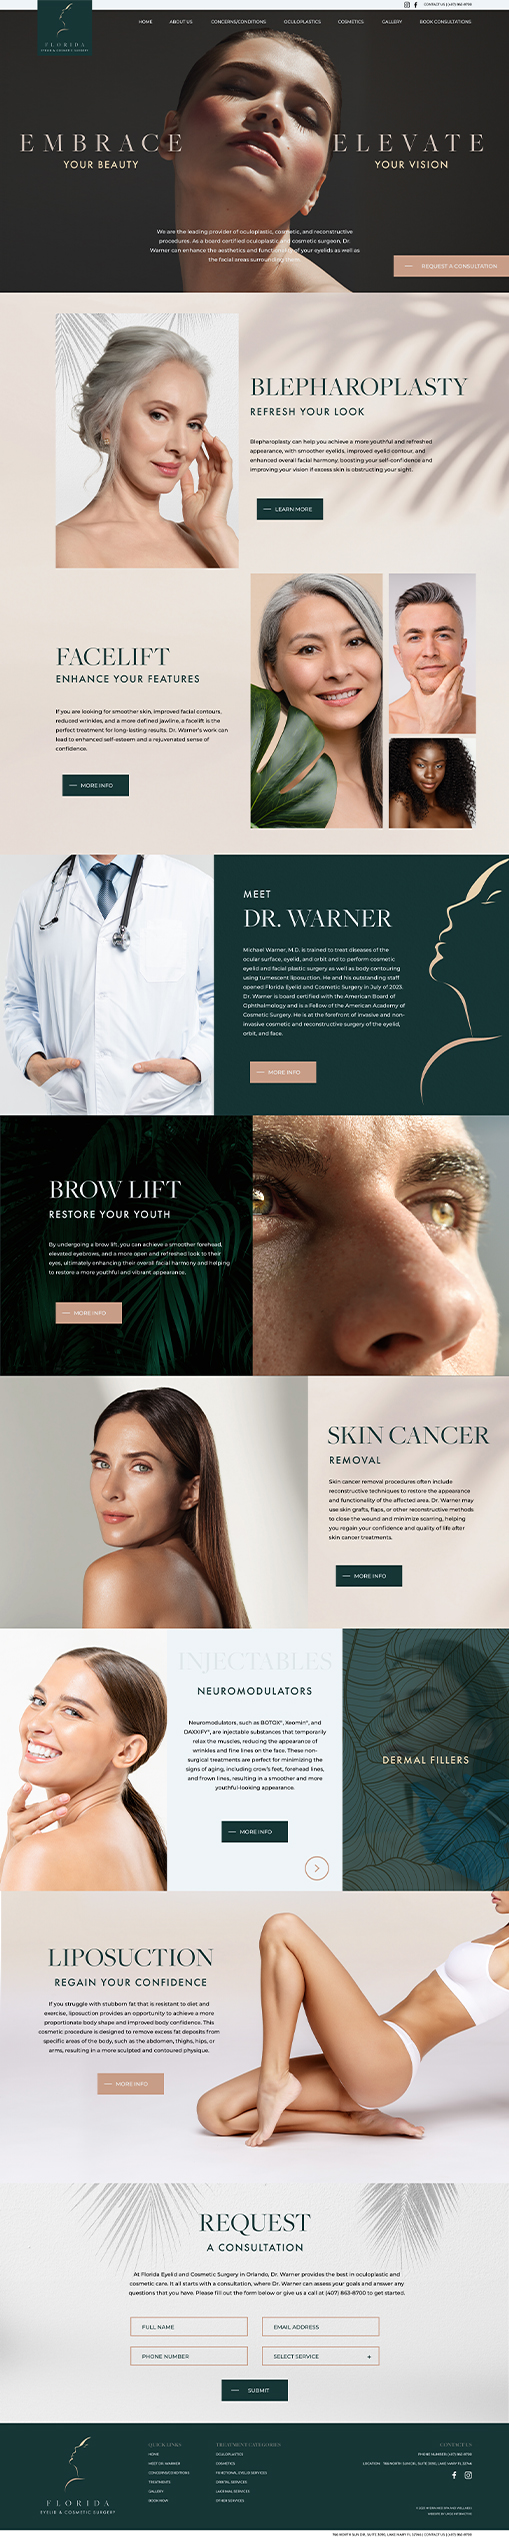 The Florida Eyelid & Cosmetic Surgery full homepage design